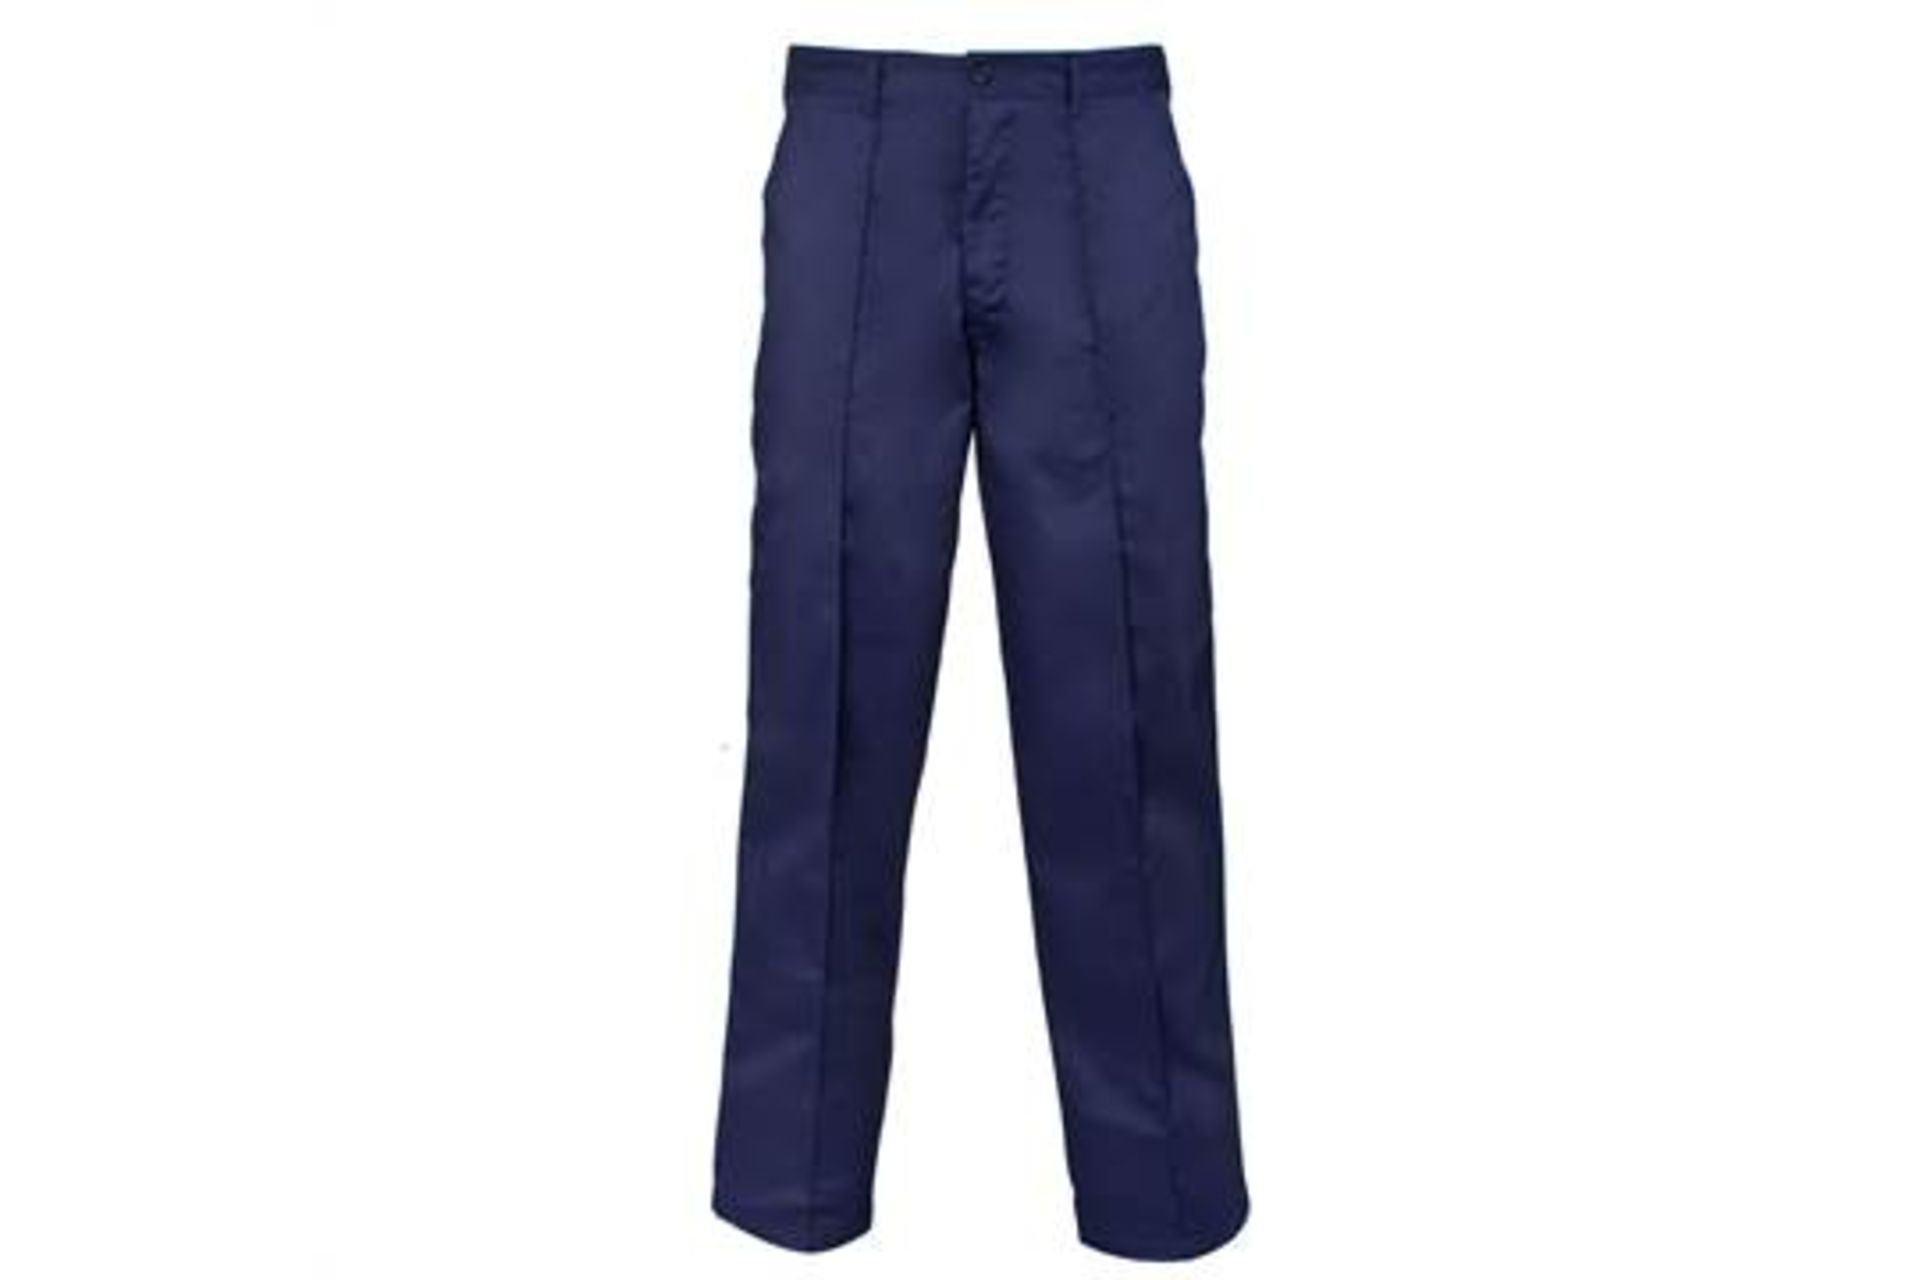 Job Lot of Discontinued Workwear 56 Pairs Brand New Long Navy Trousers 210 Grm Poly/Cotton 3 & - Image 2 of 2